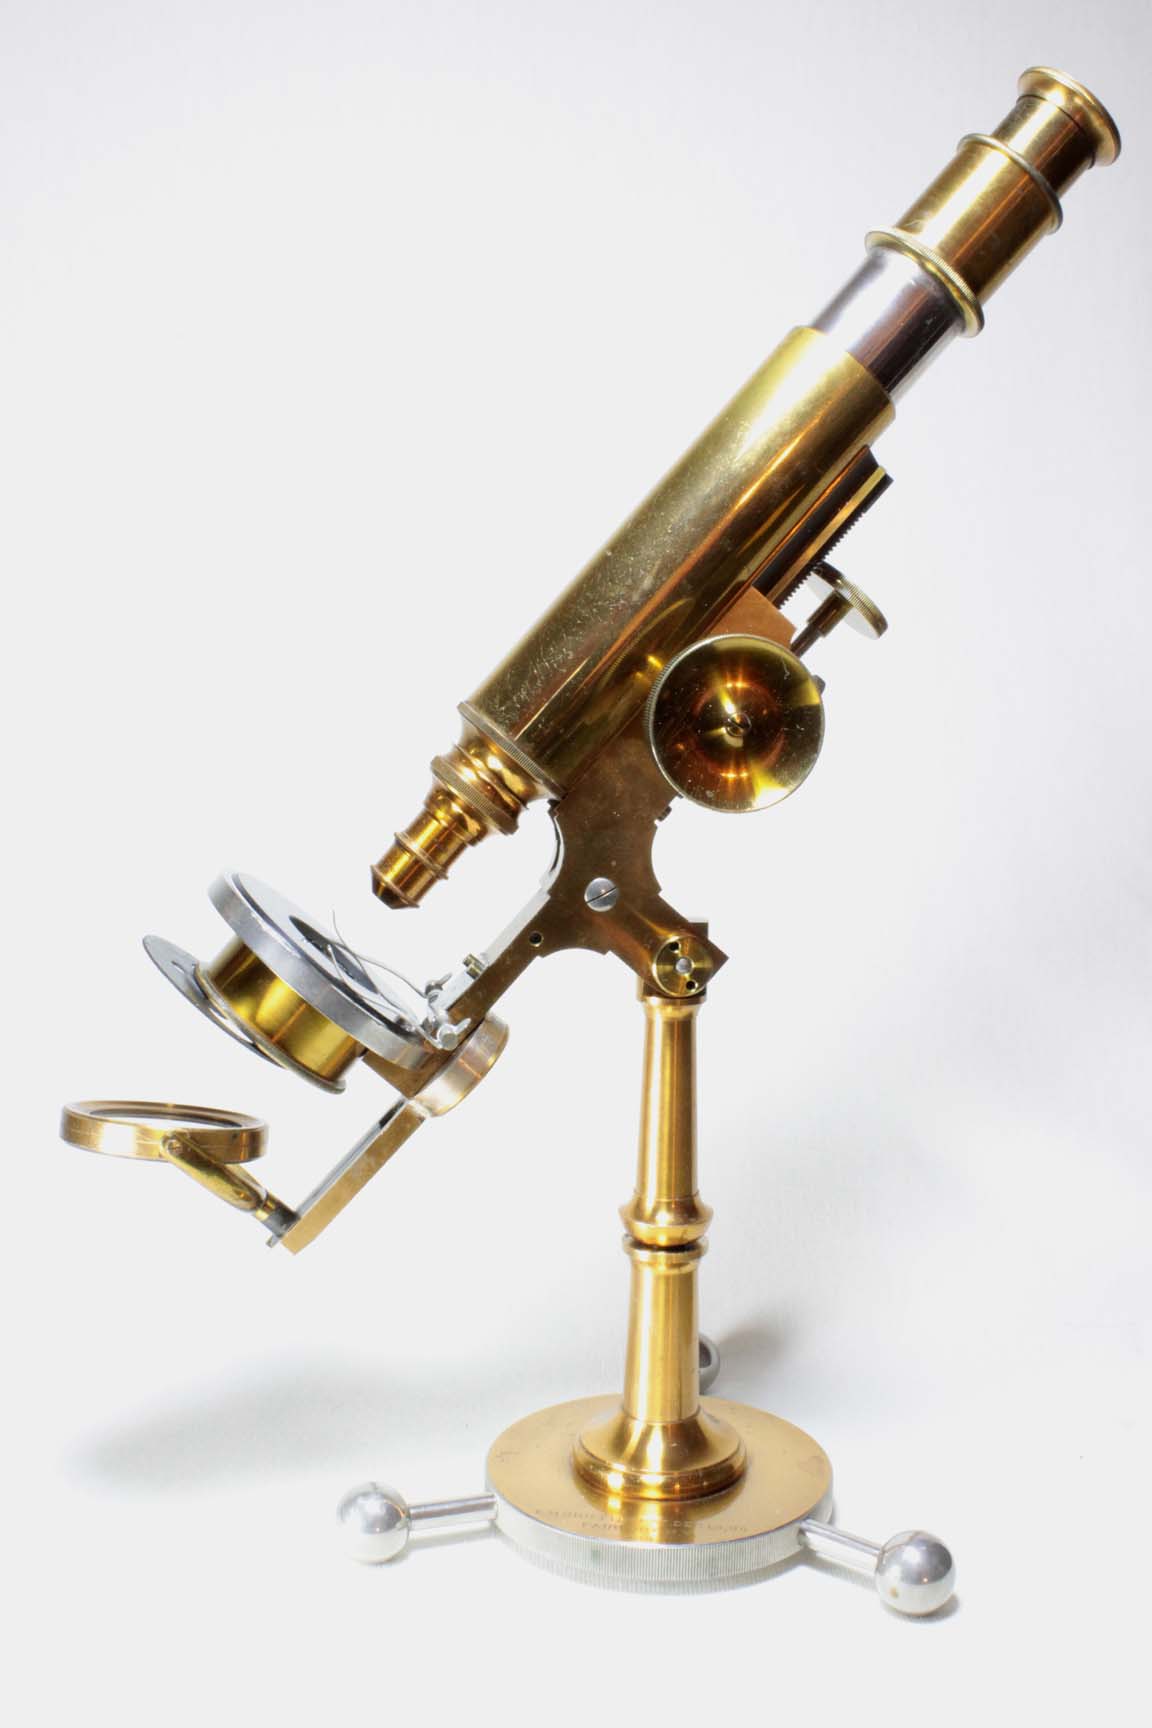 Improved Griffith Club microscope